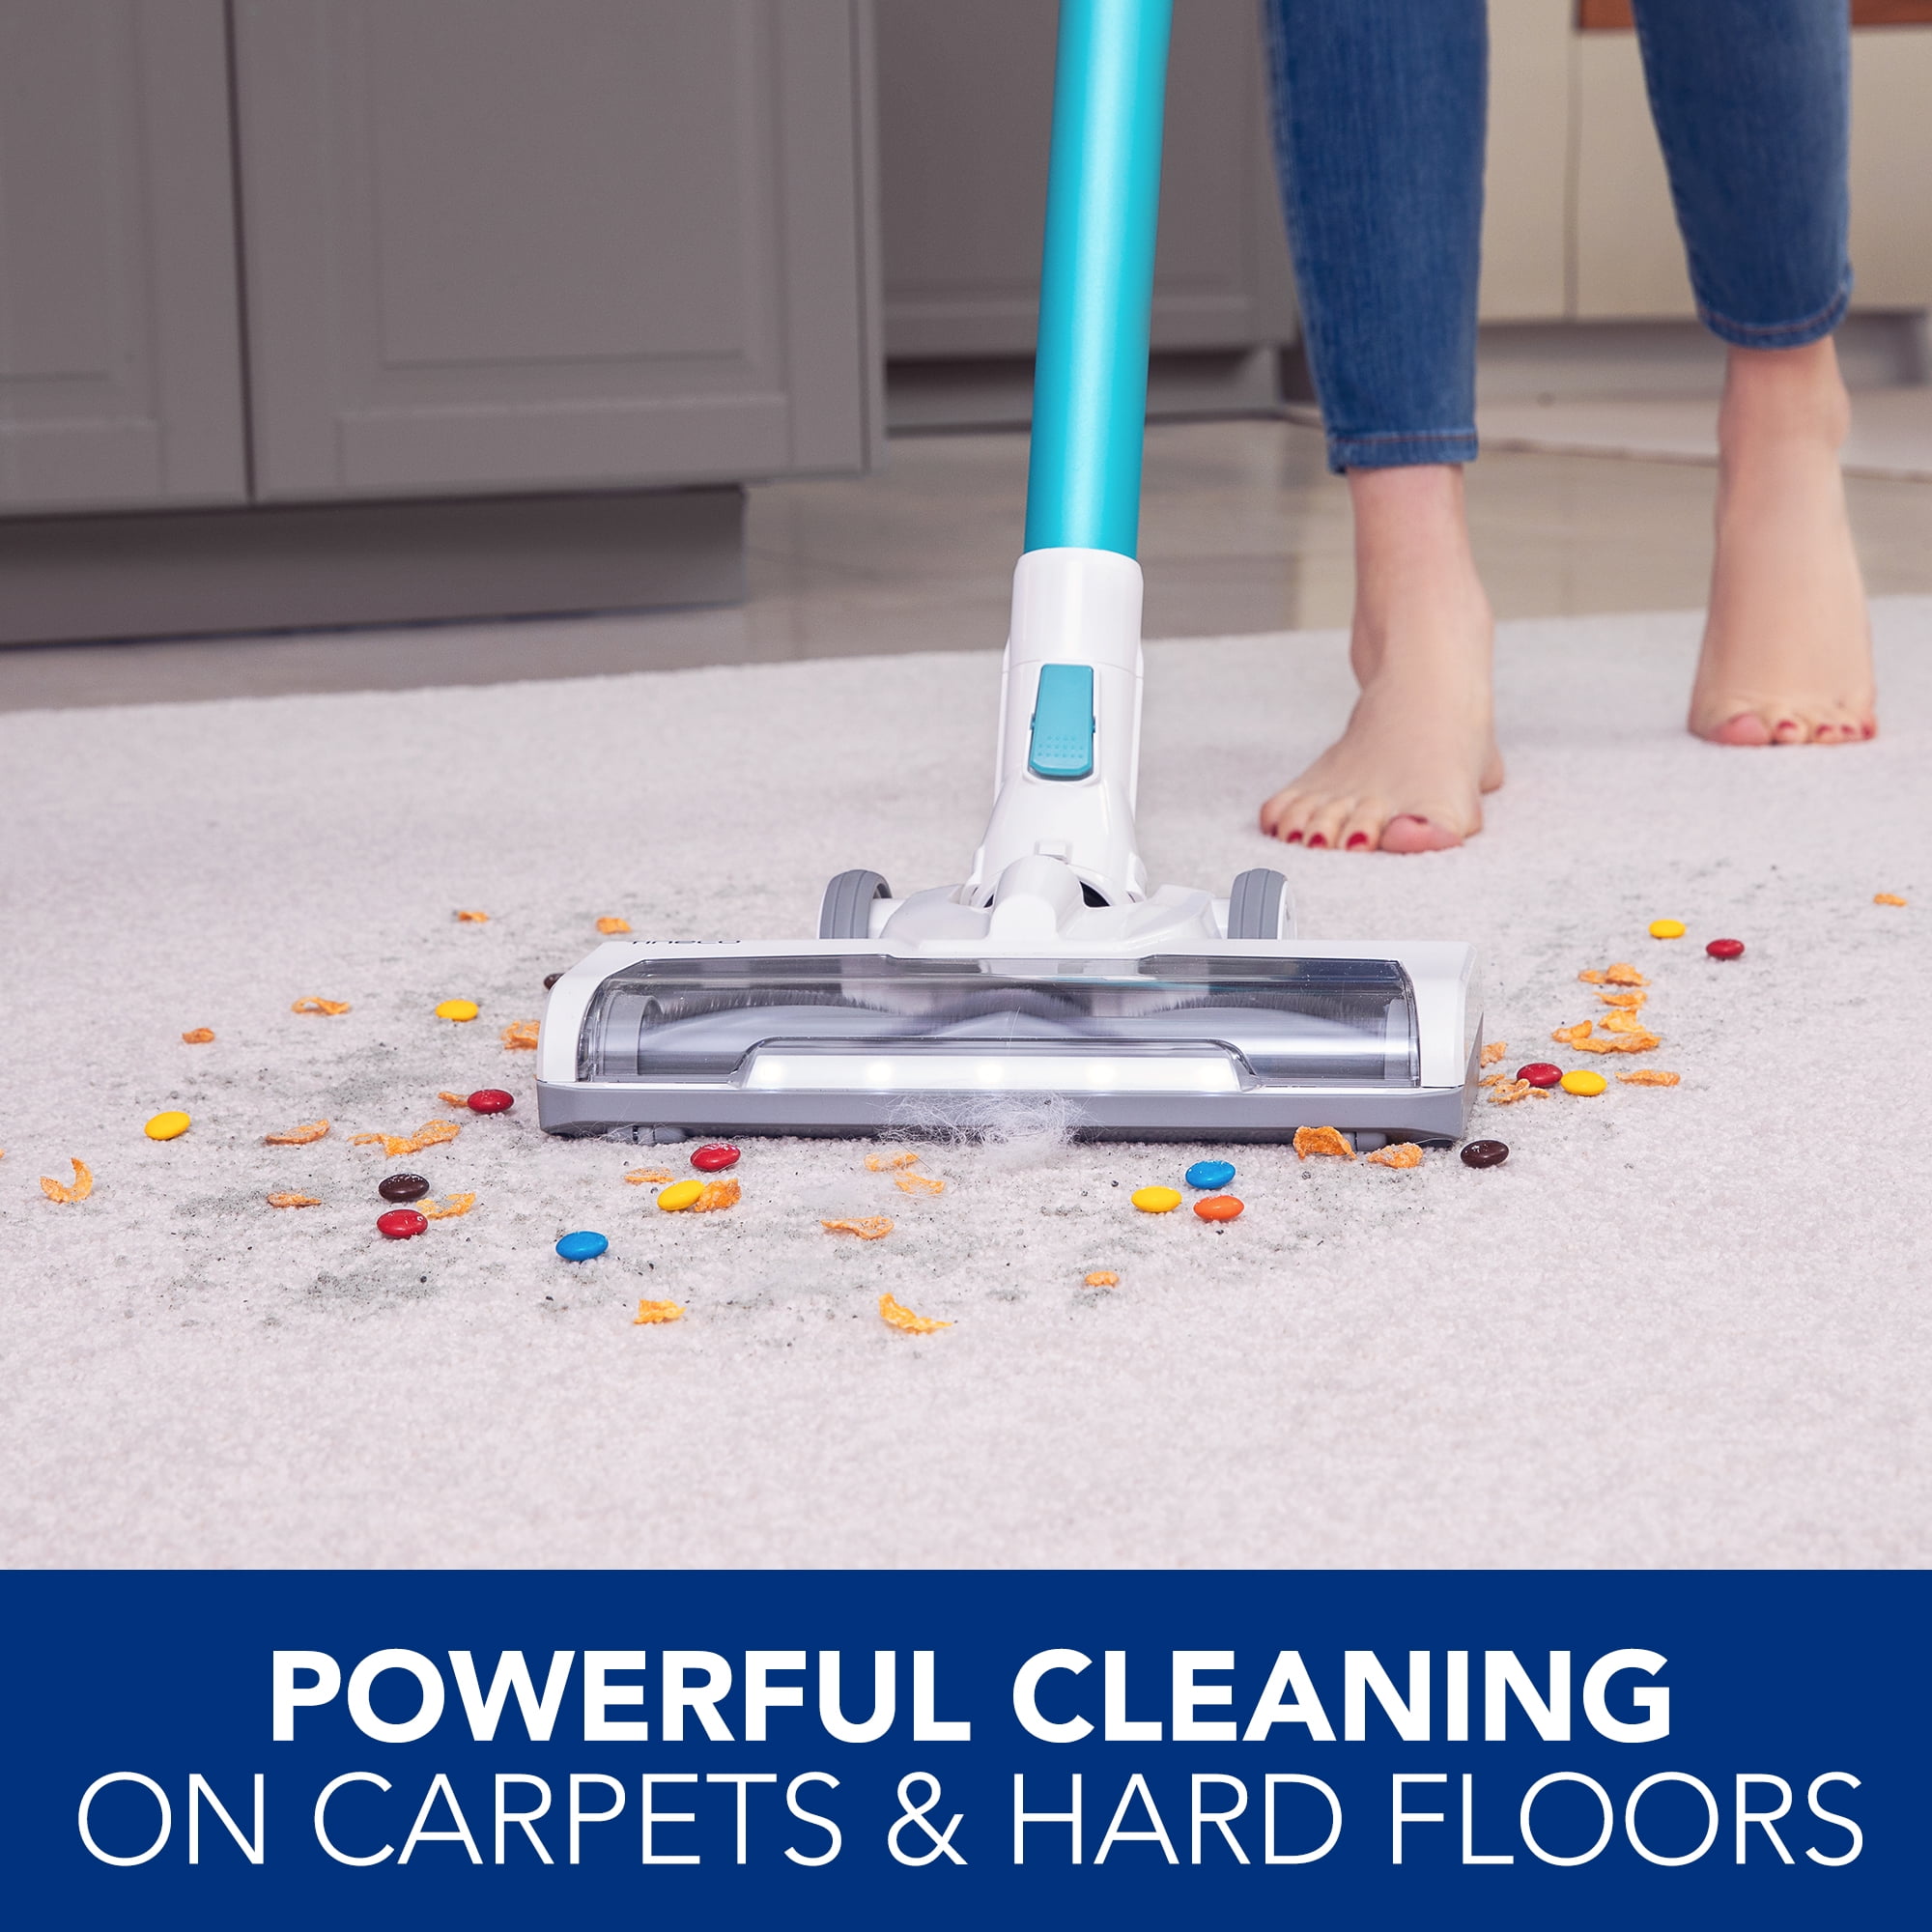 Hard with Tineco Stick Vacuum for Lightweight Cleaner Carpet, Suction Powerful PWRHERO Pet and Surfaces 11 Hair Cordless